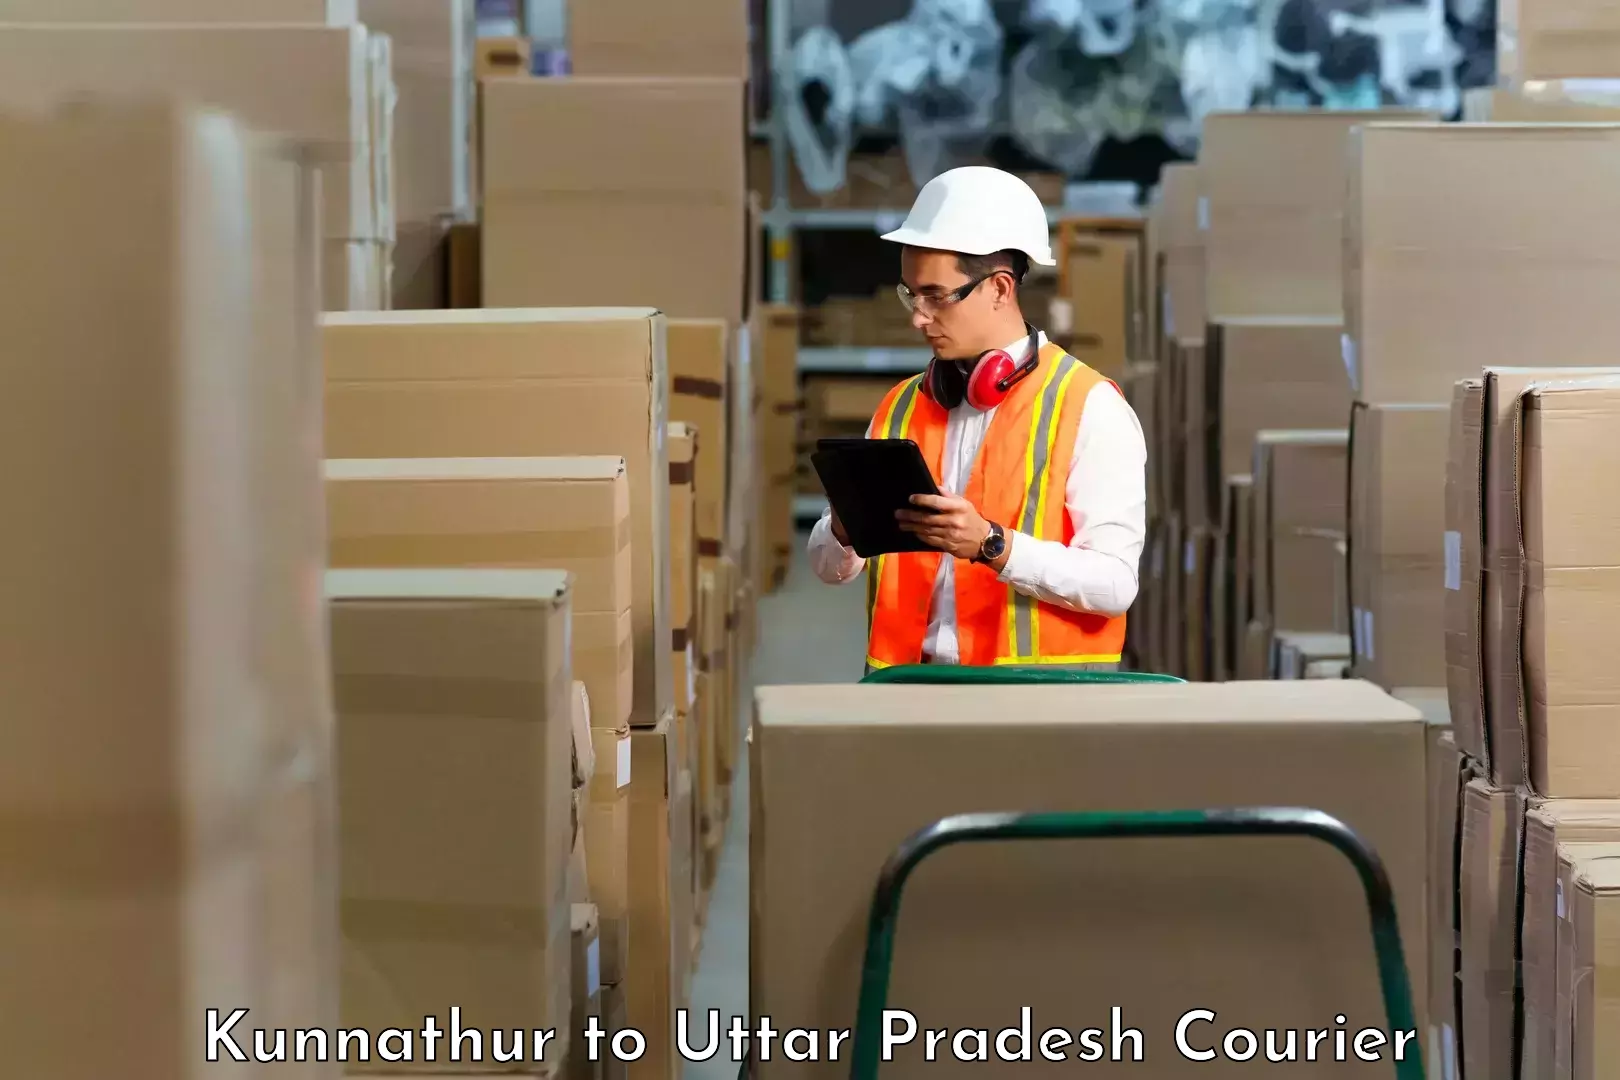 Courier service innovation Kunnathur to Kanth